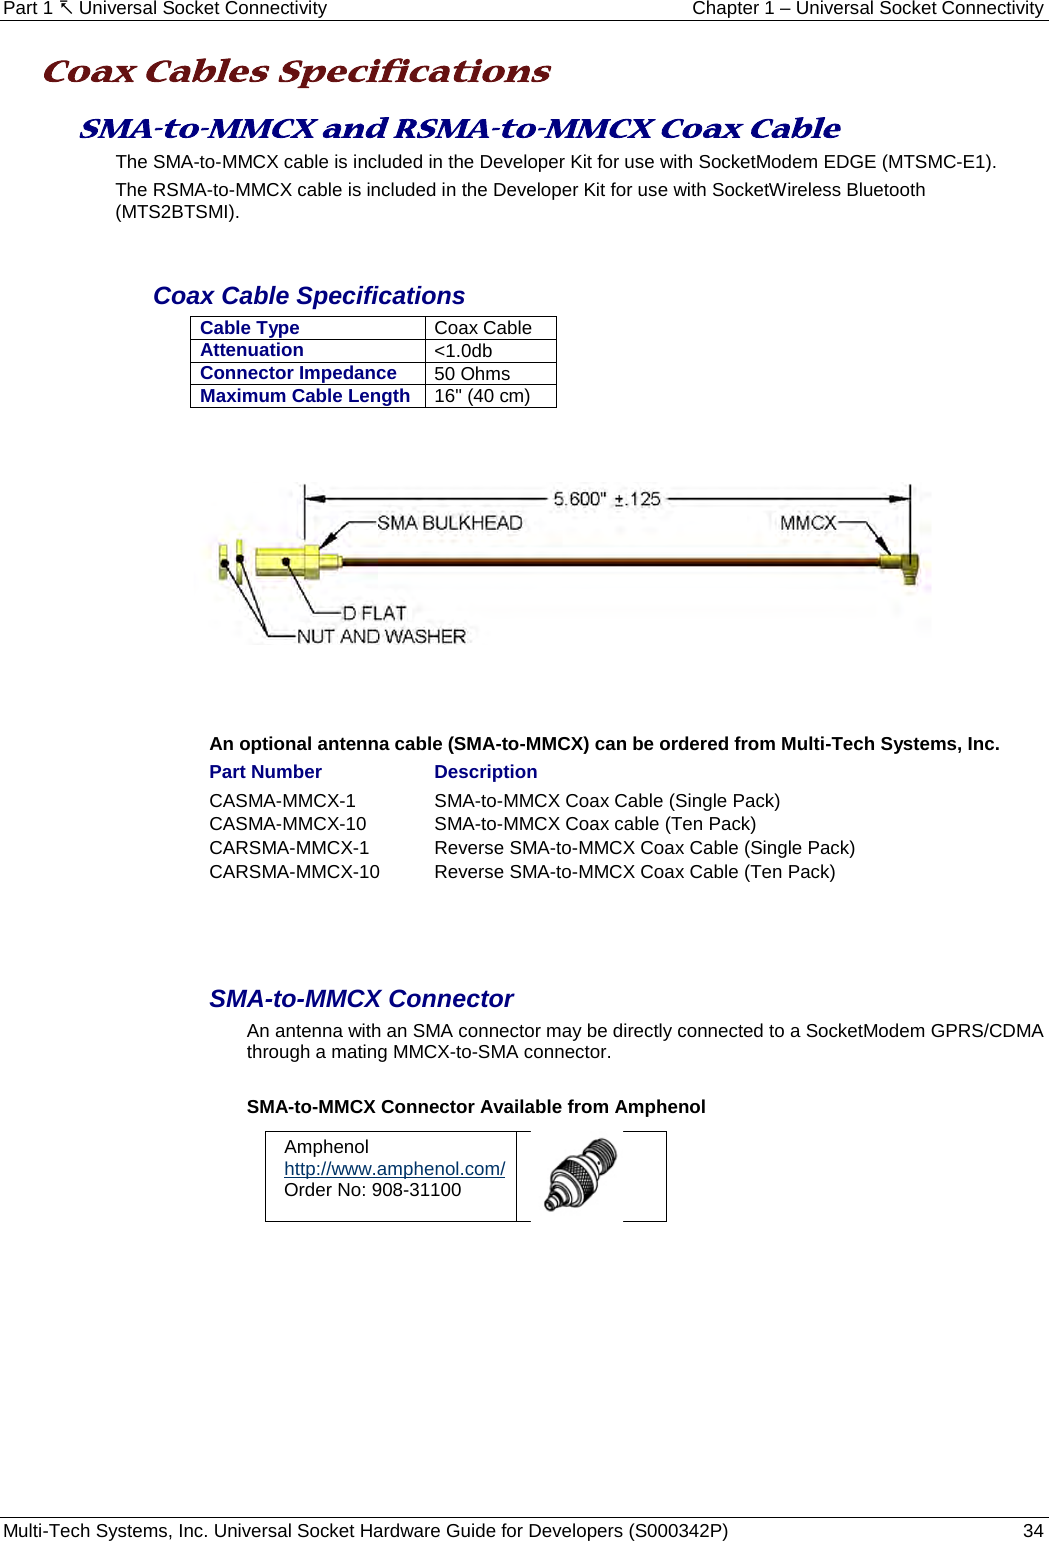 Part 1  Universal Socket Connectivity Chapter 1 – Universal Socket Connectivity Multi-Tech Systems, Inc. Universal Socket Hardware Guide for Developers (S000342P)  34  Coax Cables Specifications SMA-to-MMCX and RSMA-to-MMCX Coax Cable The SMA-to-MMCX cable is included in the Developer Kit for use with SocketModem EDGE (MTSMC-E1). The RSMA-to-MMCX cable is included in the Developer Kit for use with SocketWireless Bluetooth (MTS2BTSMI).   Coax Cable Specifications Cable Type Coax Cable Attenuation &lt;1.0db Connector Impedance 50 Ohms Maximum Cable Length 16&quot; (40 cm)        An optional antenna cable (SMA-to-MMCX) can be ordered from Multi-Tech Systems, Inc.  Part Number    Description CASMA-MMCX-1     SMA-to-MMCX Coax Cable (Single Pack) CASMA-MMCX-10     SMA-to-MMCX Coax cable (Ten Pack) CARSMA-MMCX-1    Reverse SMA-to-MMCX Coax Cable (Single Pack) CARSMA-MMCX-10    Reverse SMA-to-MMCX Coax Cable (Ten Pack)   SMA-to-MMCX Connector An antenna with an SMA connector may be directly connected to a SocketModem GPRS/CDMA through a mating MMCX-to-SMA connector.   SMA-to-MMCX Connector Available from Amphenol Amphenol  http://www.amphenol.com/ Order No: 908-31100      